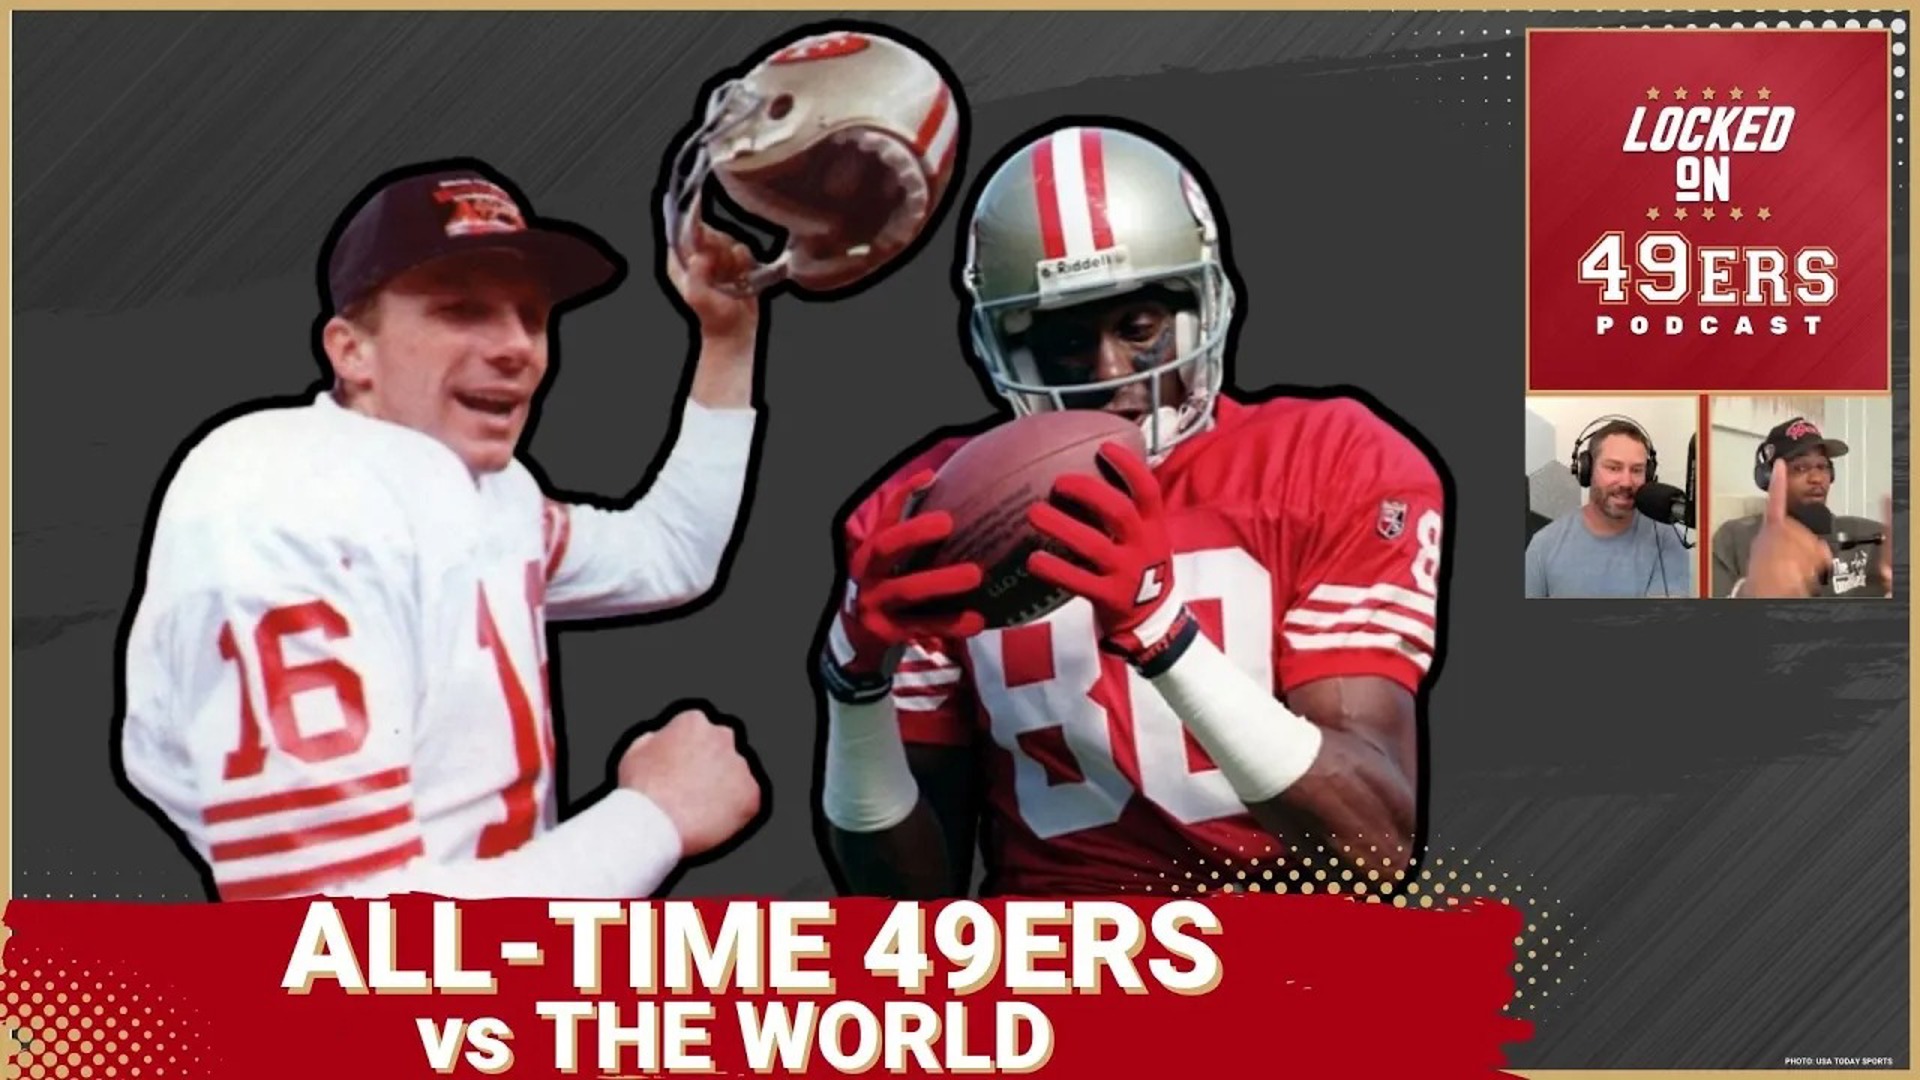 Is a team of all-time great San Francisco 49ers as good or better than the other 31 NFL franchises combined!?